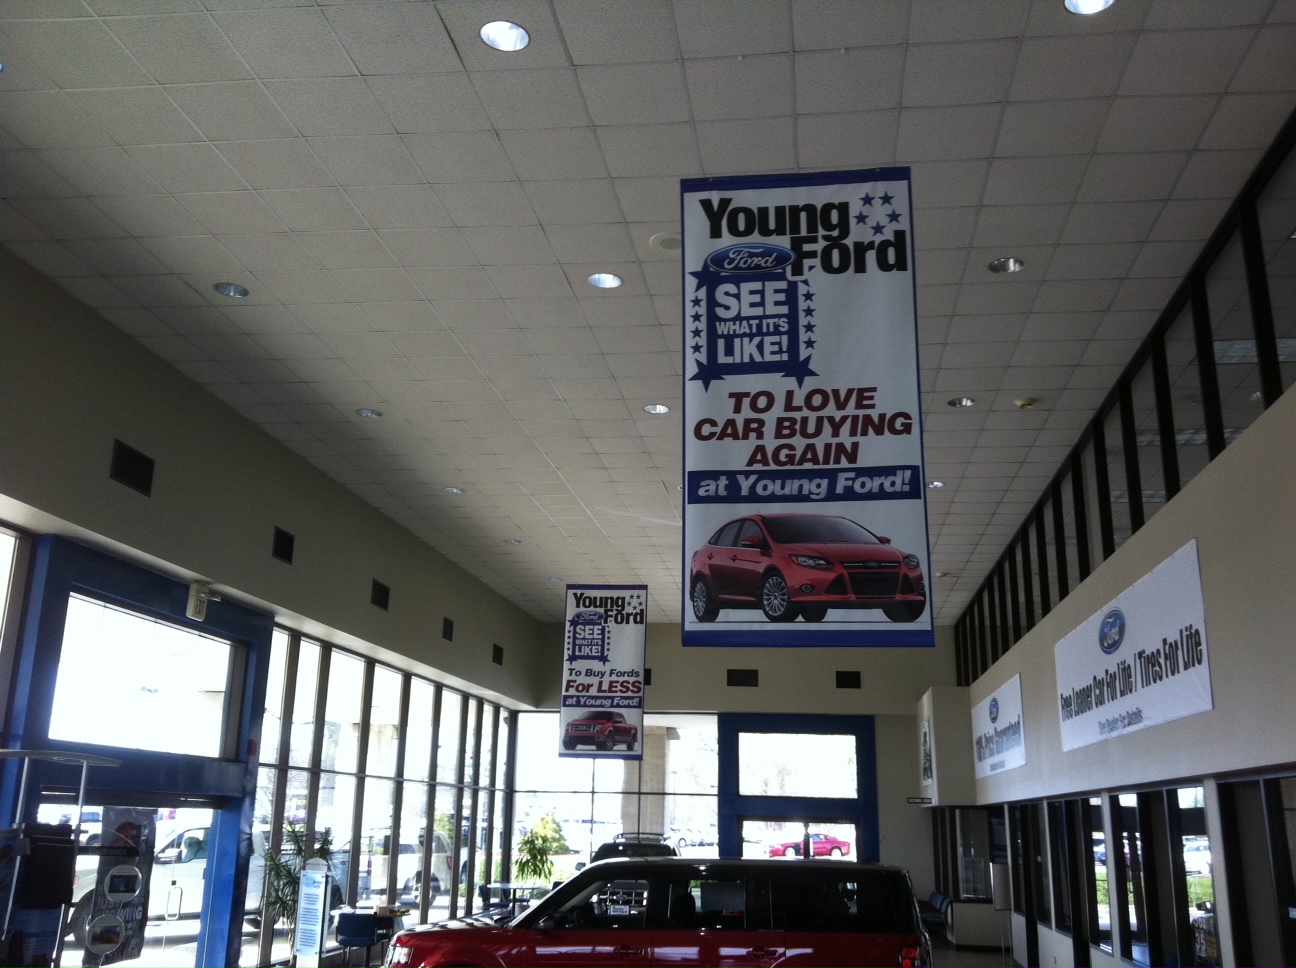 Young Ford signage